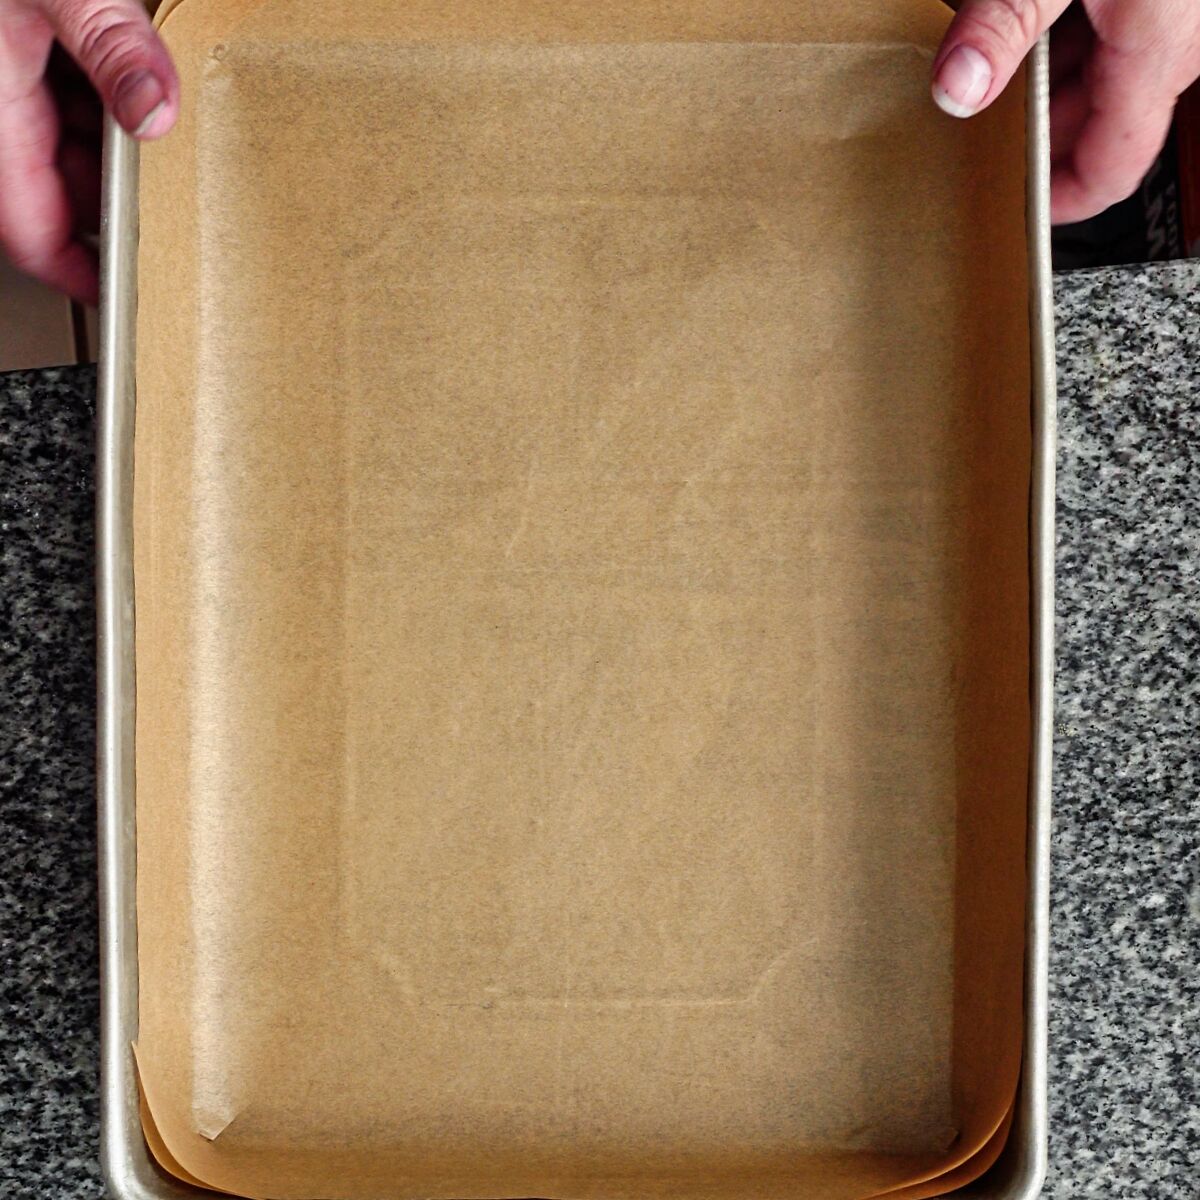 lining 9 by 13 inch baking pan with brown parchment paper.